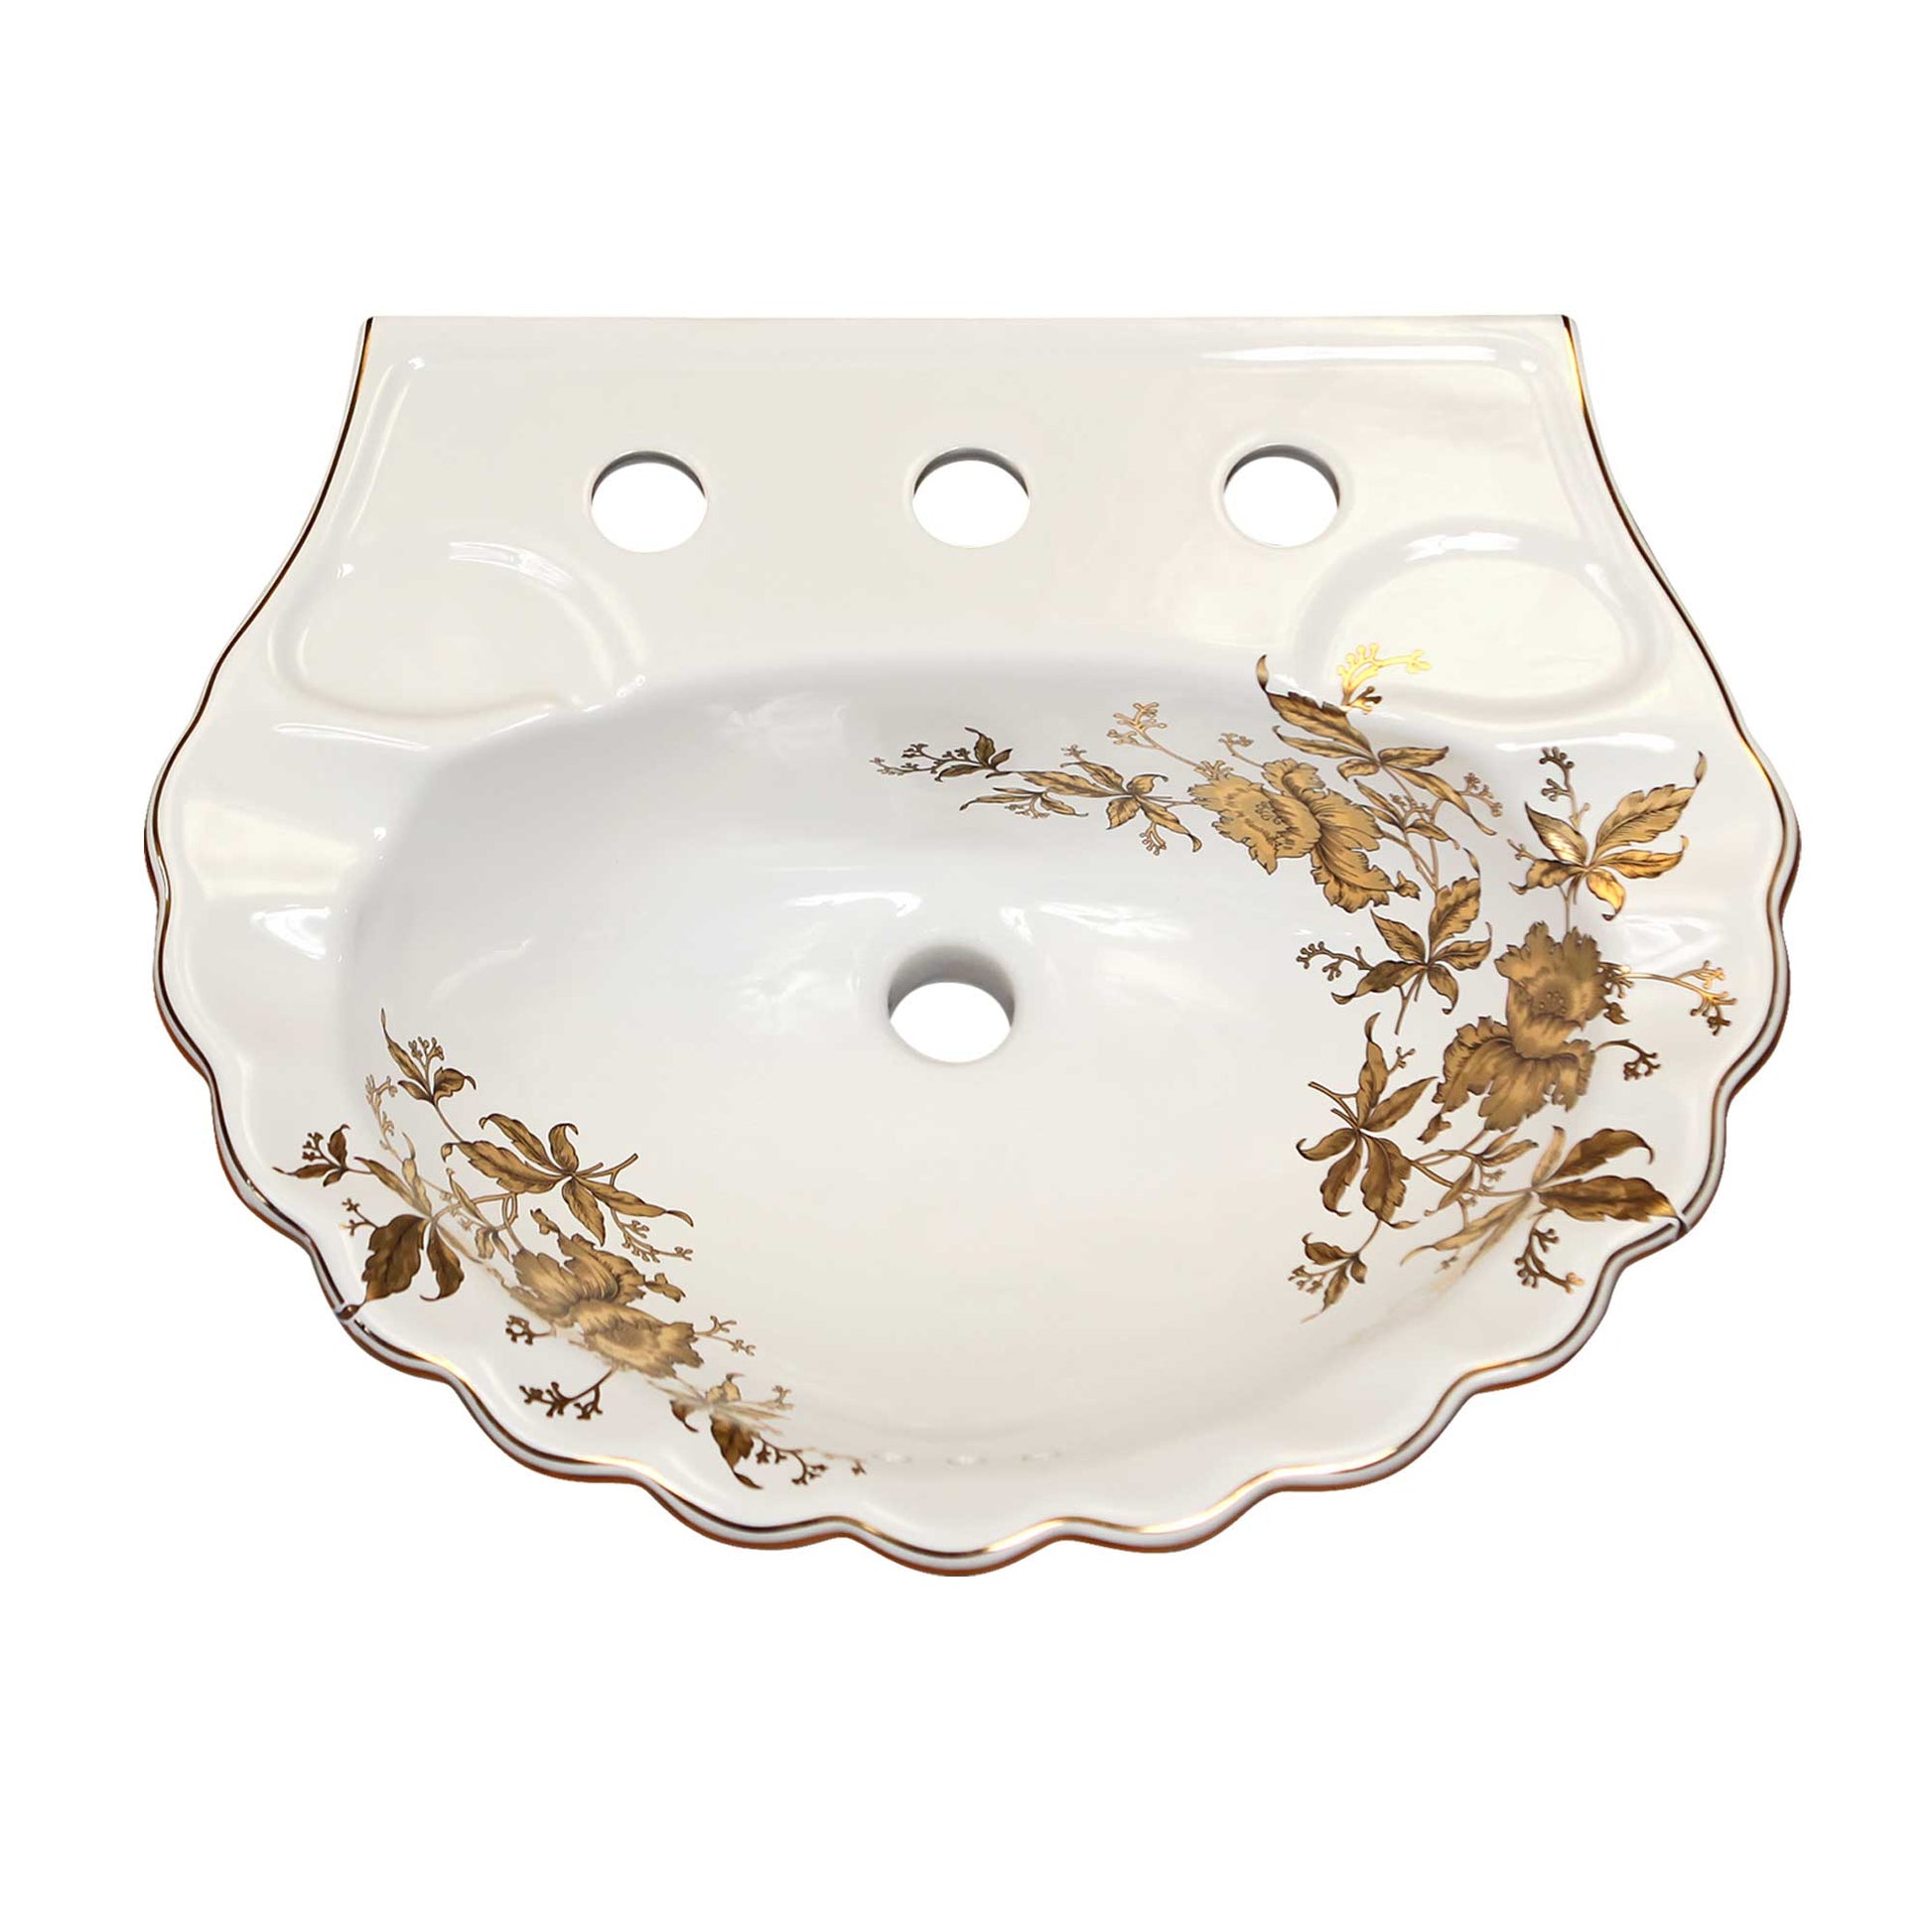 Top view of the gold orchids design painted on a pretty scalloped edge pedestal sink bowl.